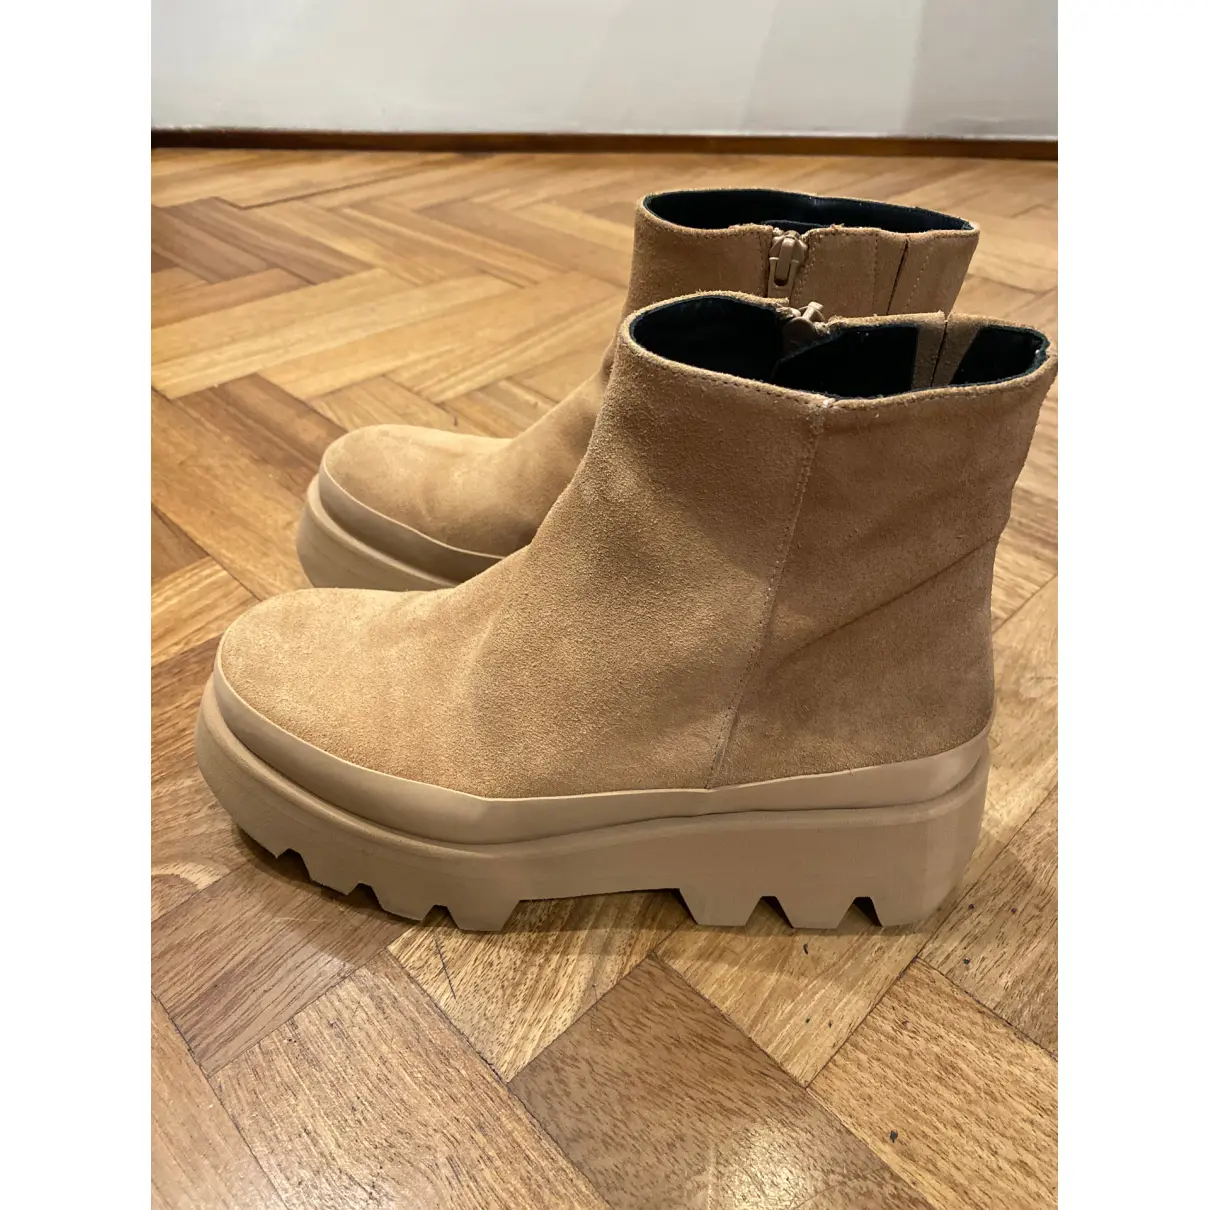 Luxury Paloma Barcelo Ankle boots Women